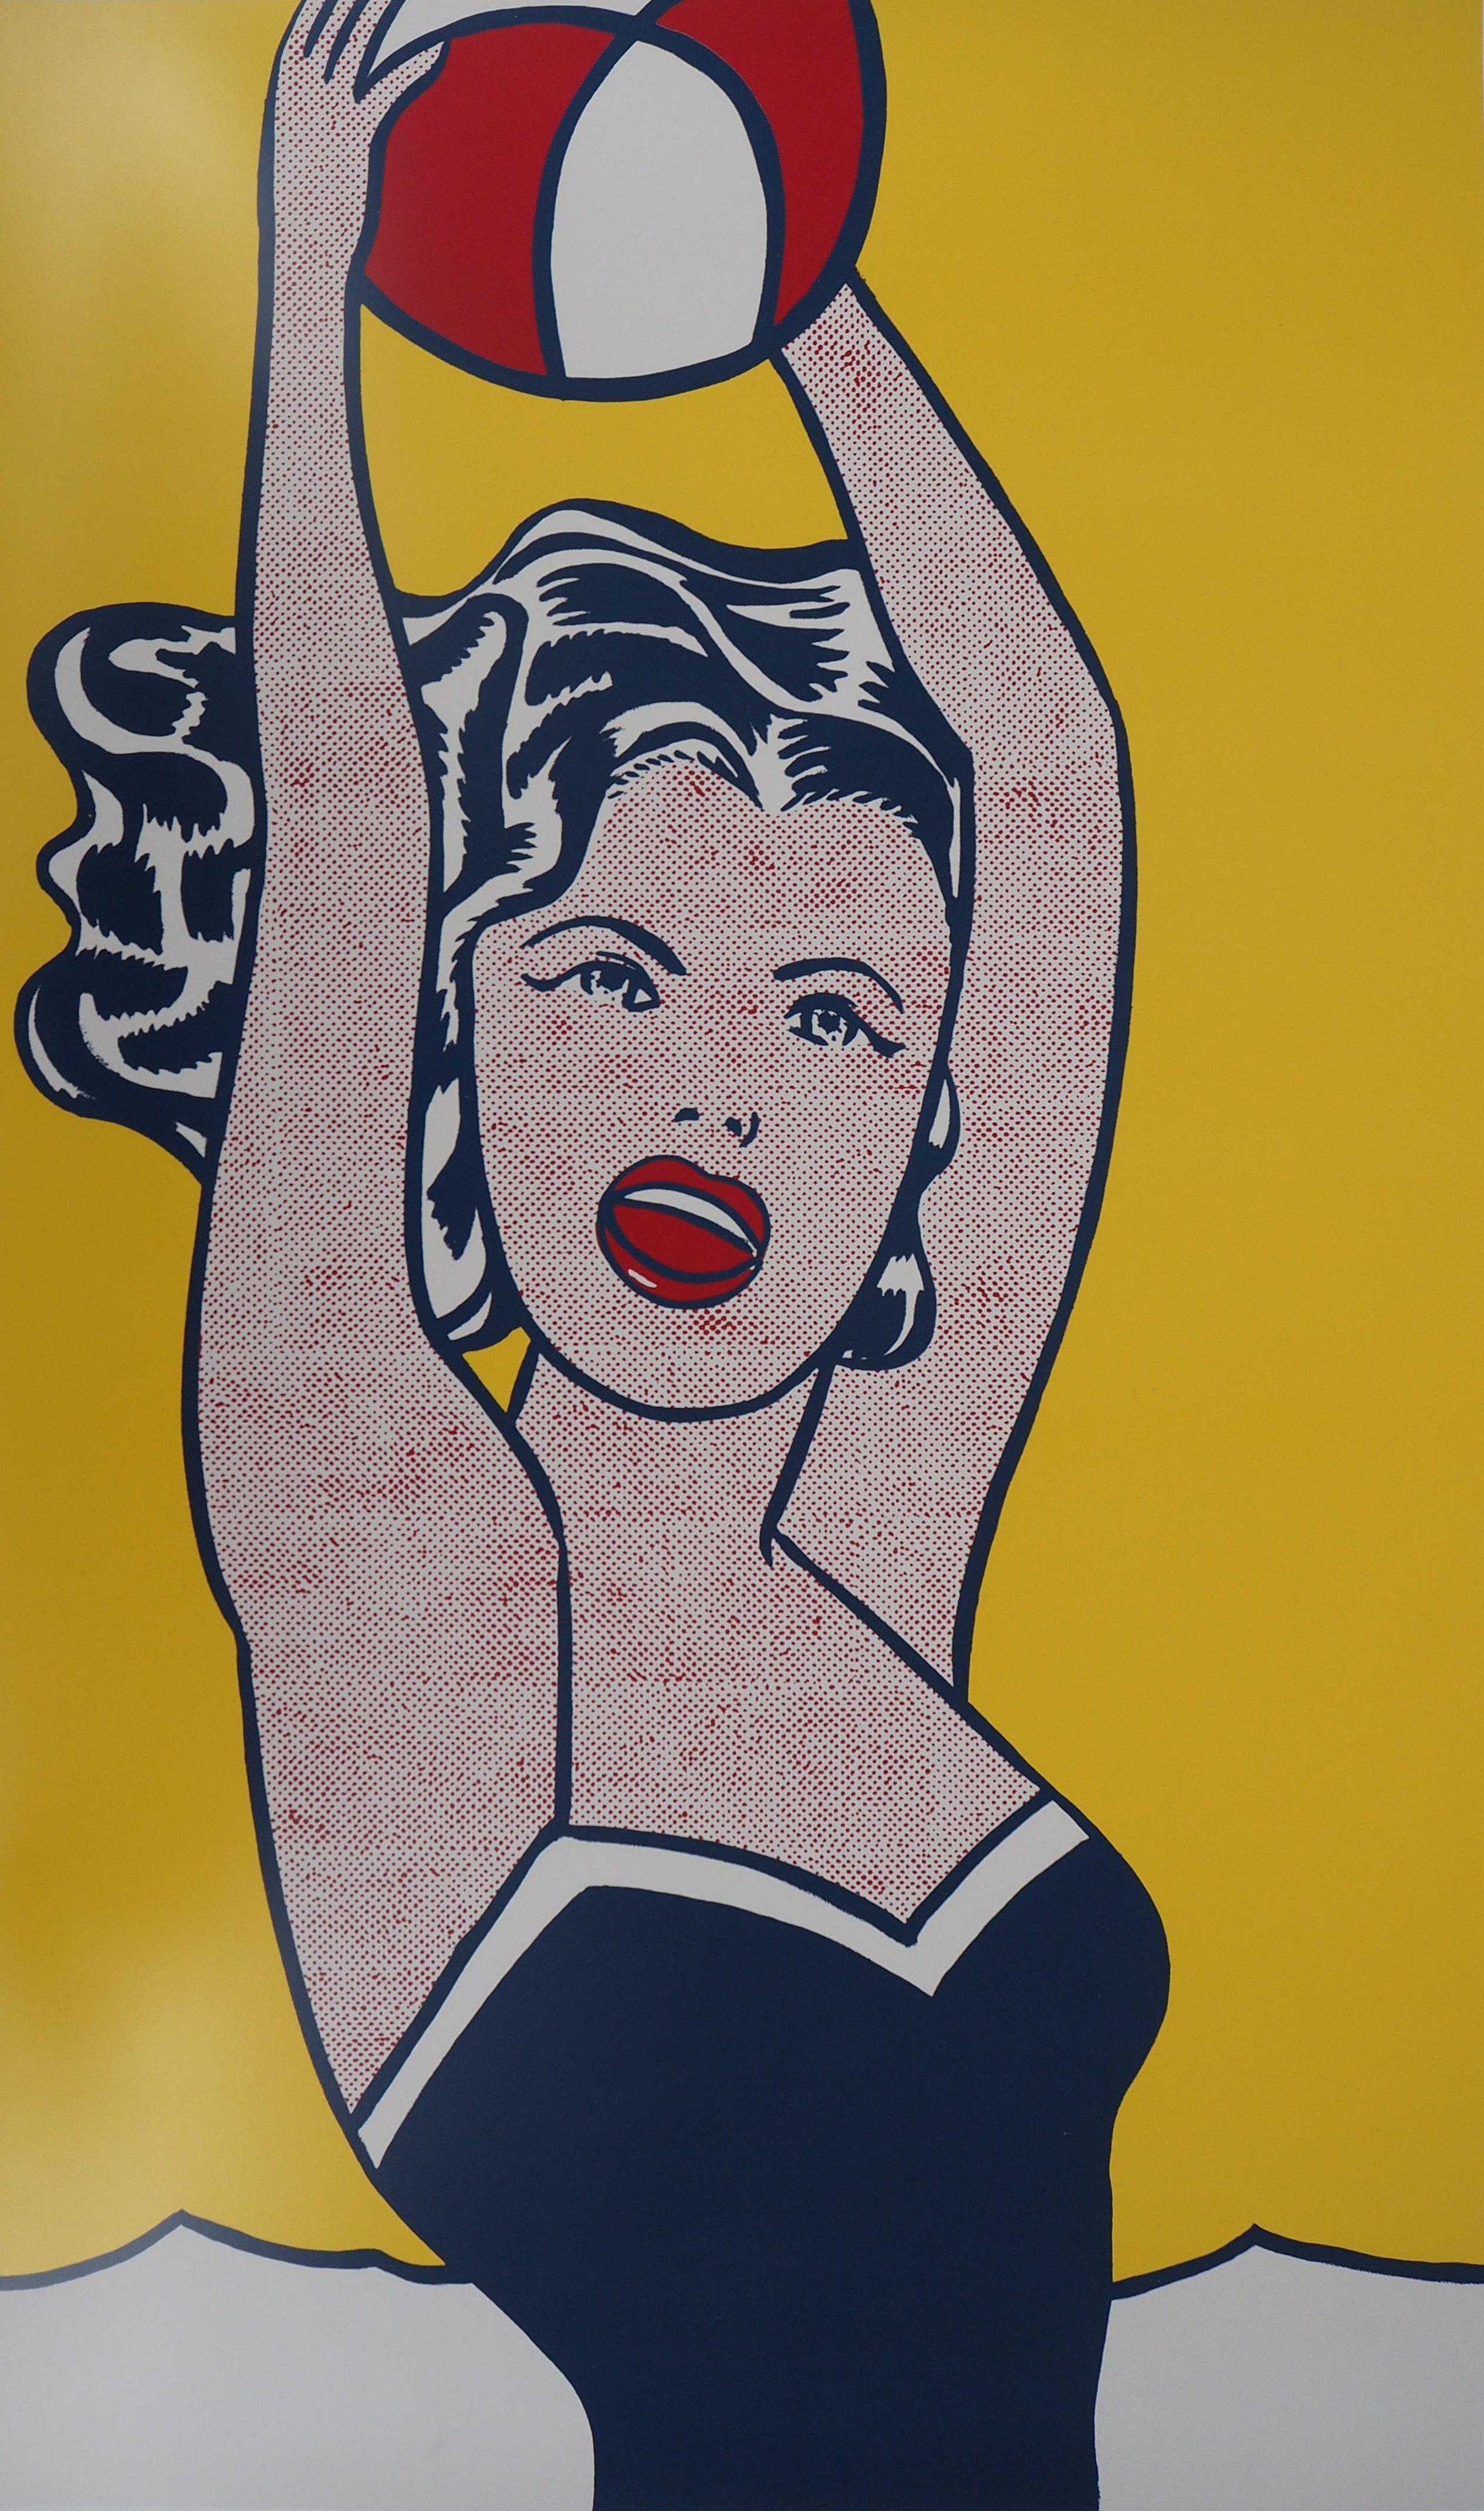 Woman with Red Ball - Original vintage poster, Bruxelles 1995 - Pop Art Print by (after) Roy Lichtenstein